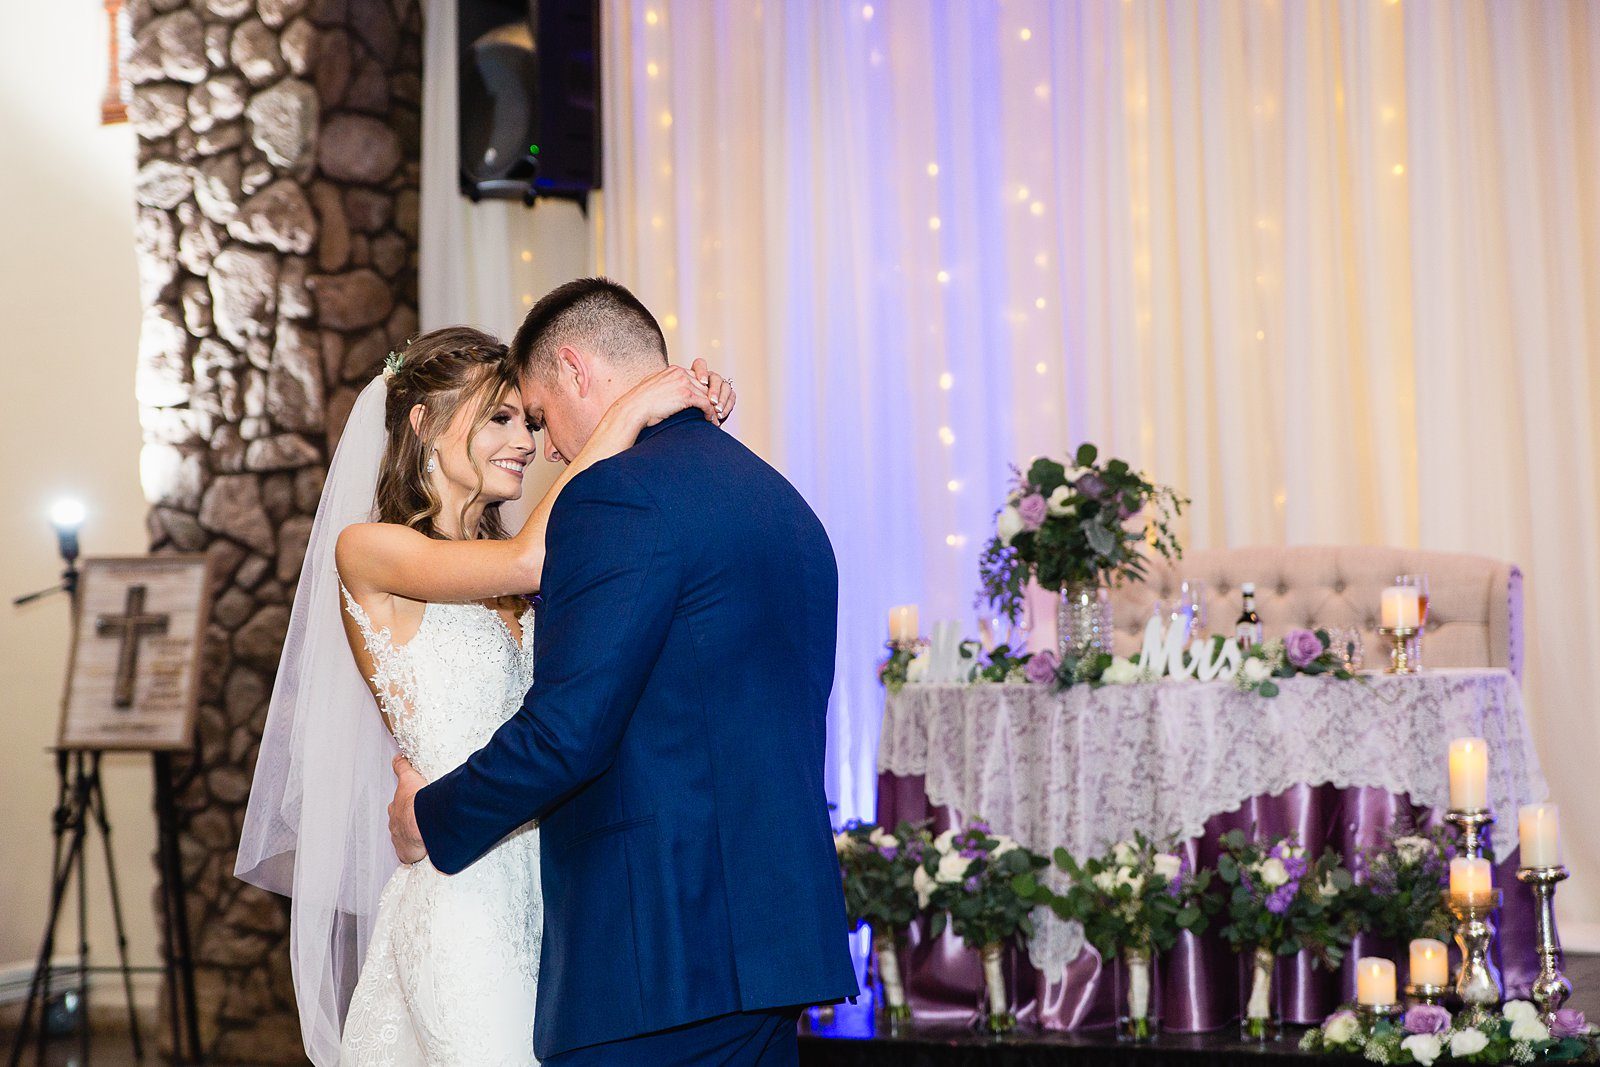 Bride and Groom sharing first dance at their Superstition Manor wedding reception by Arizona wedding photographer PMA Photography.